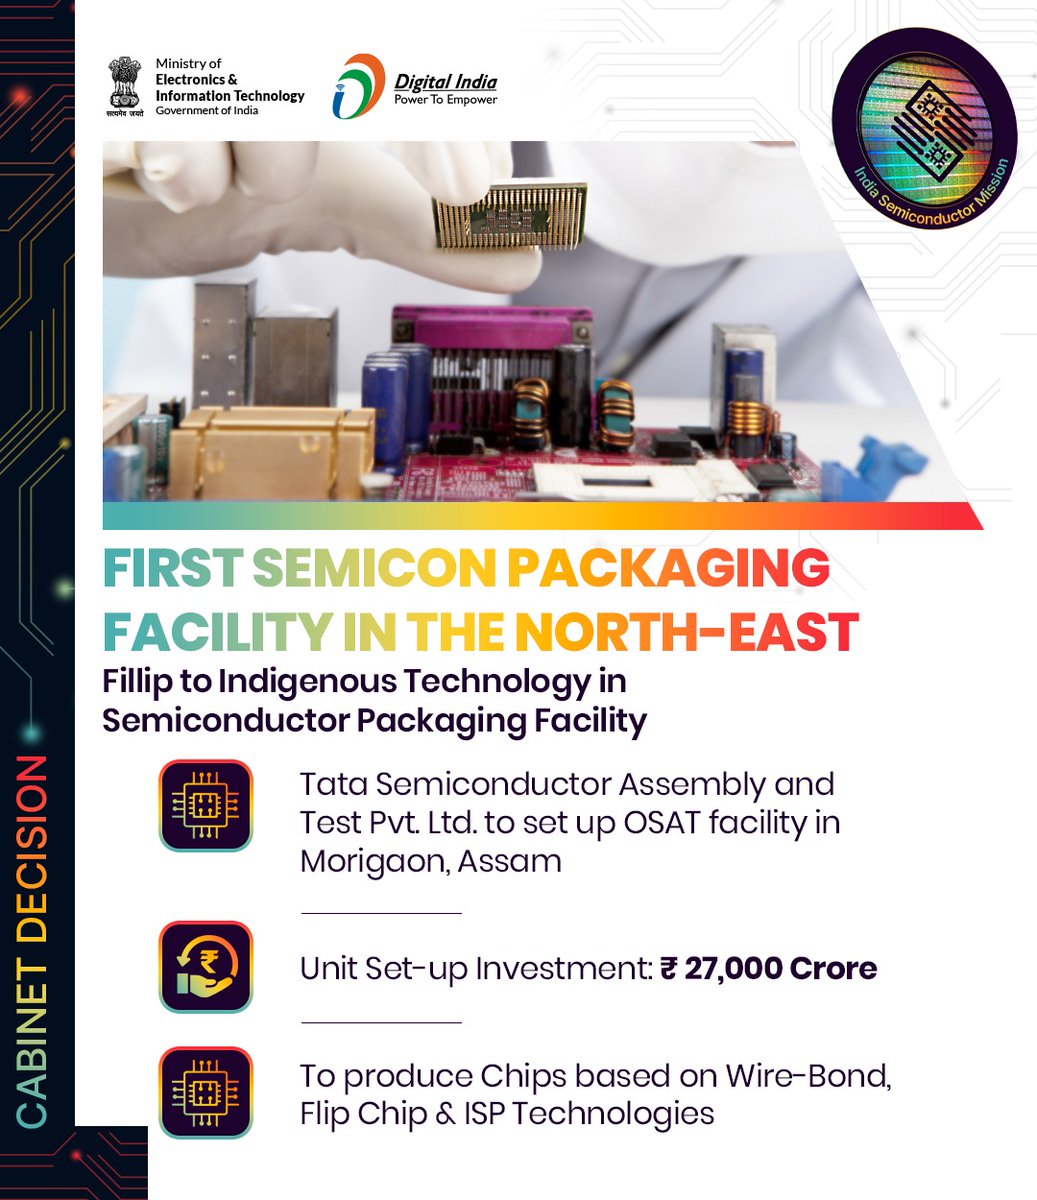 Giving a fillip to Indigenous technology in #semiconductor packaging facility, the Cabinet has approved the setting up of an Outsourced Semiconductor Assembly and Test (OSAT) facility at District Morigaon, Assam. #CabinetDecision #DigitalIndia #SemiconIndia